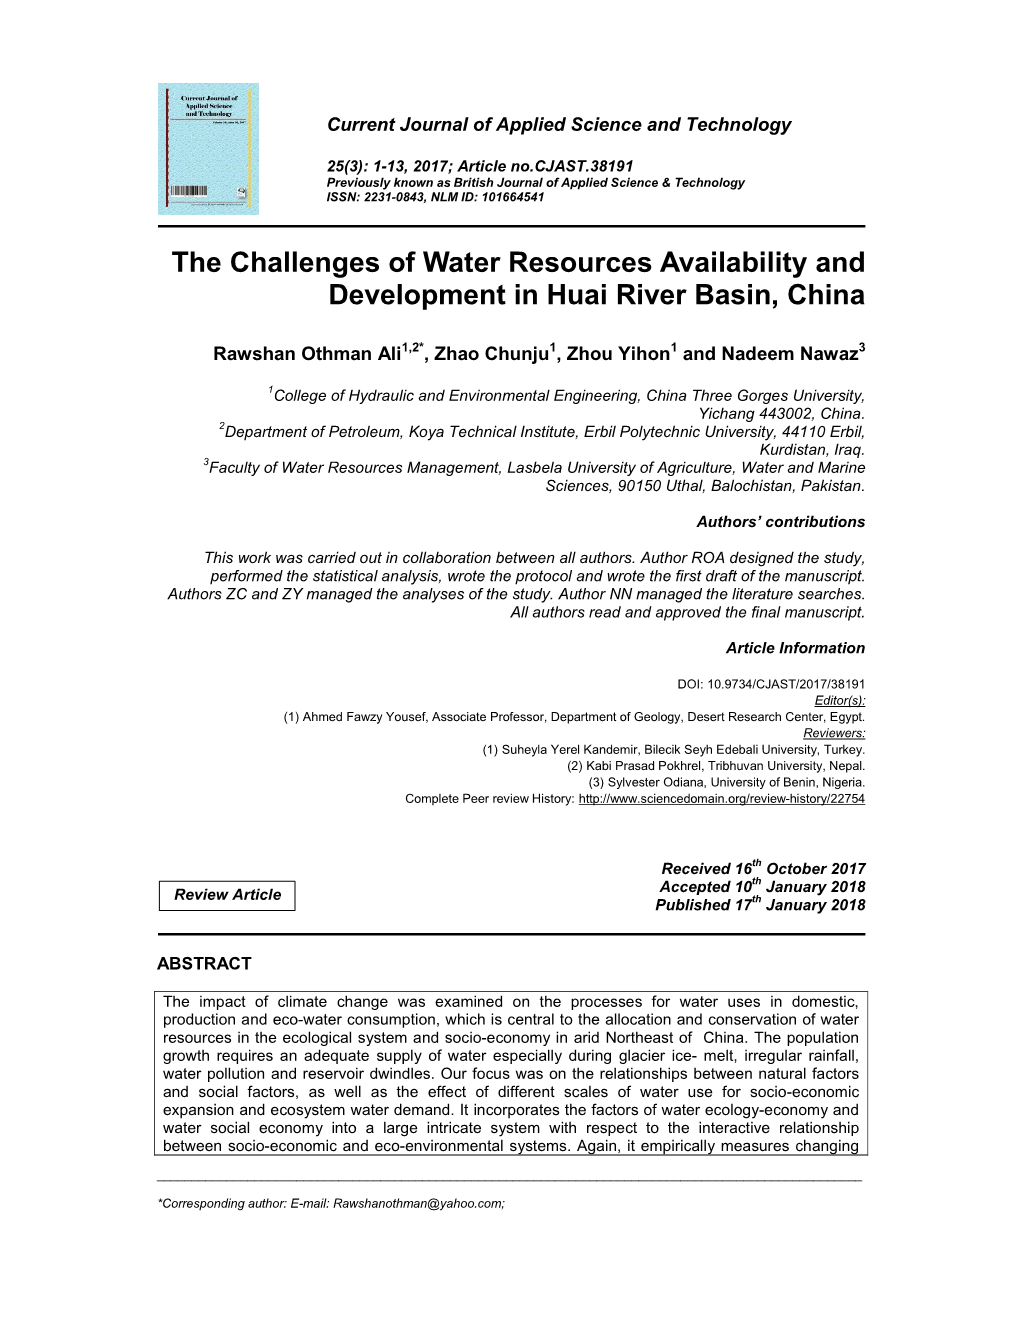 The Challenges of Water Resources Availability and Development in Huai River Basin, China